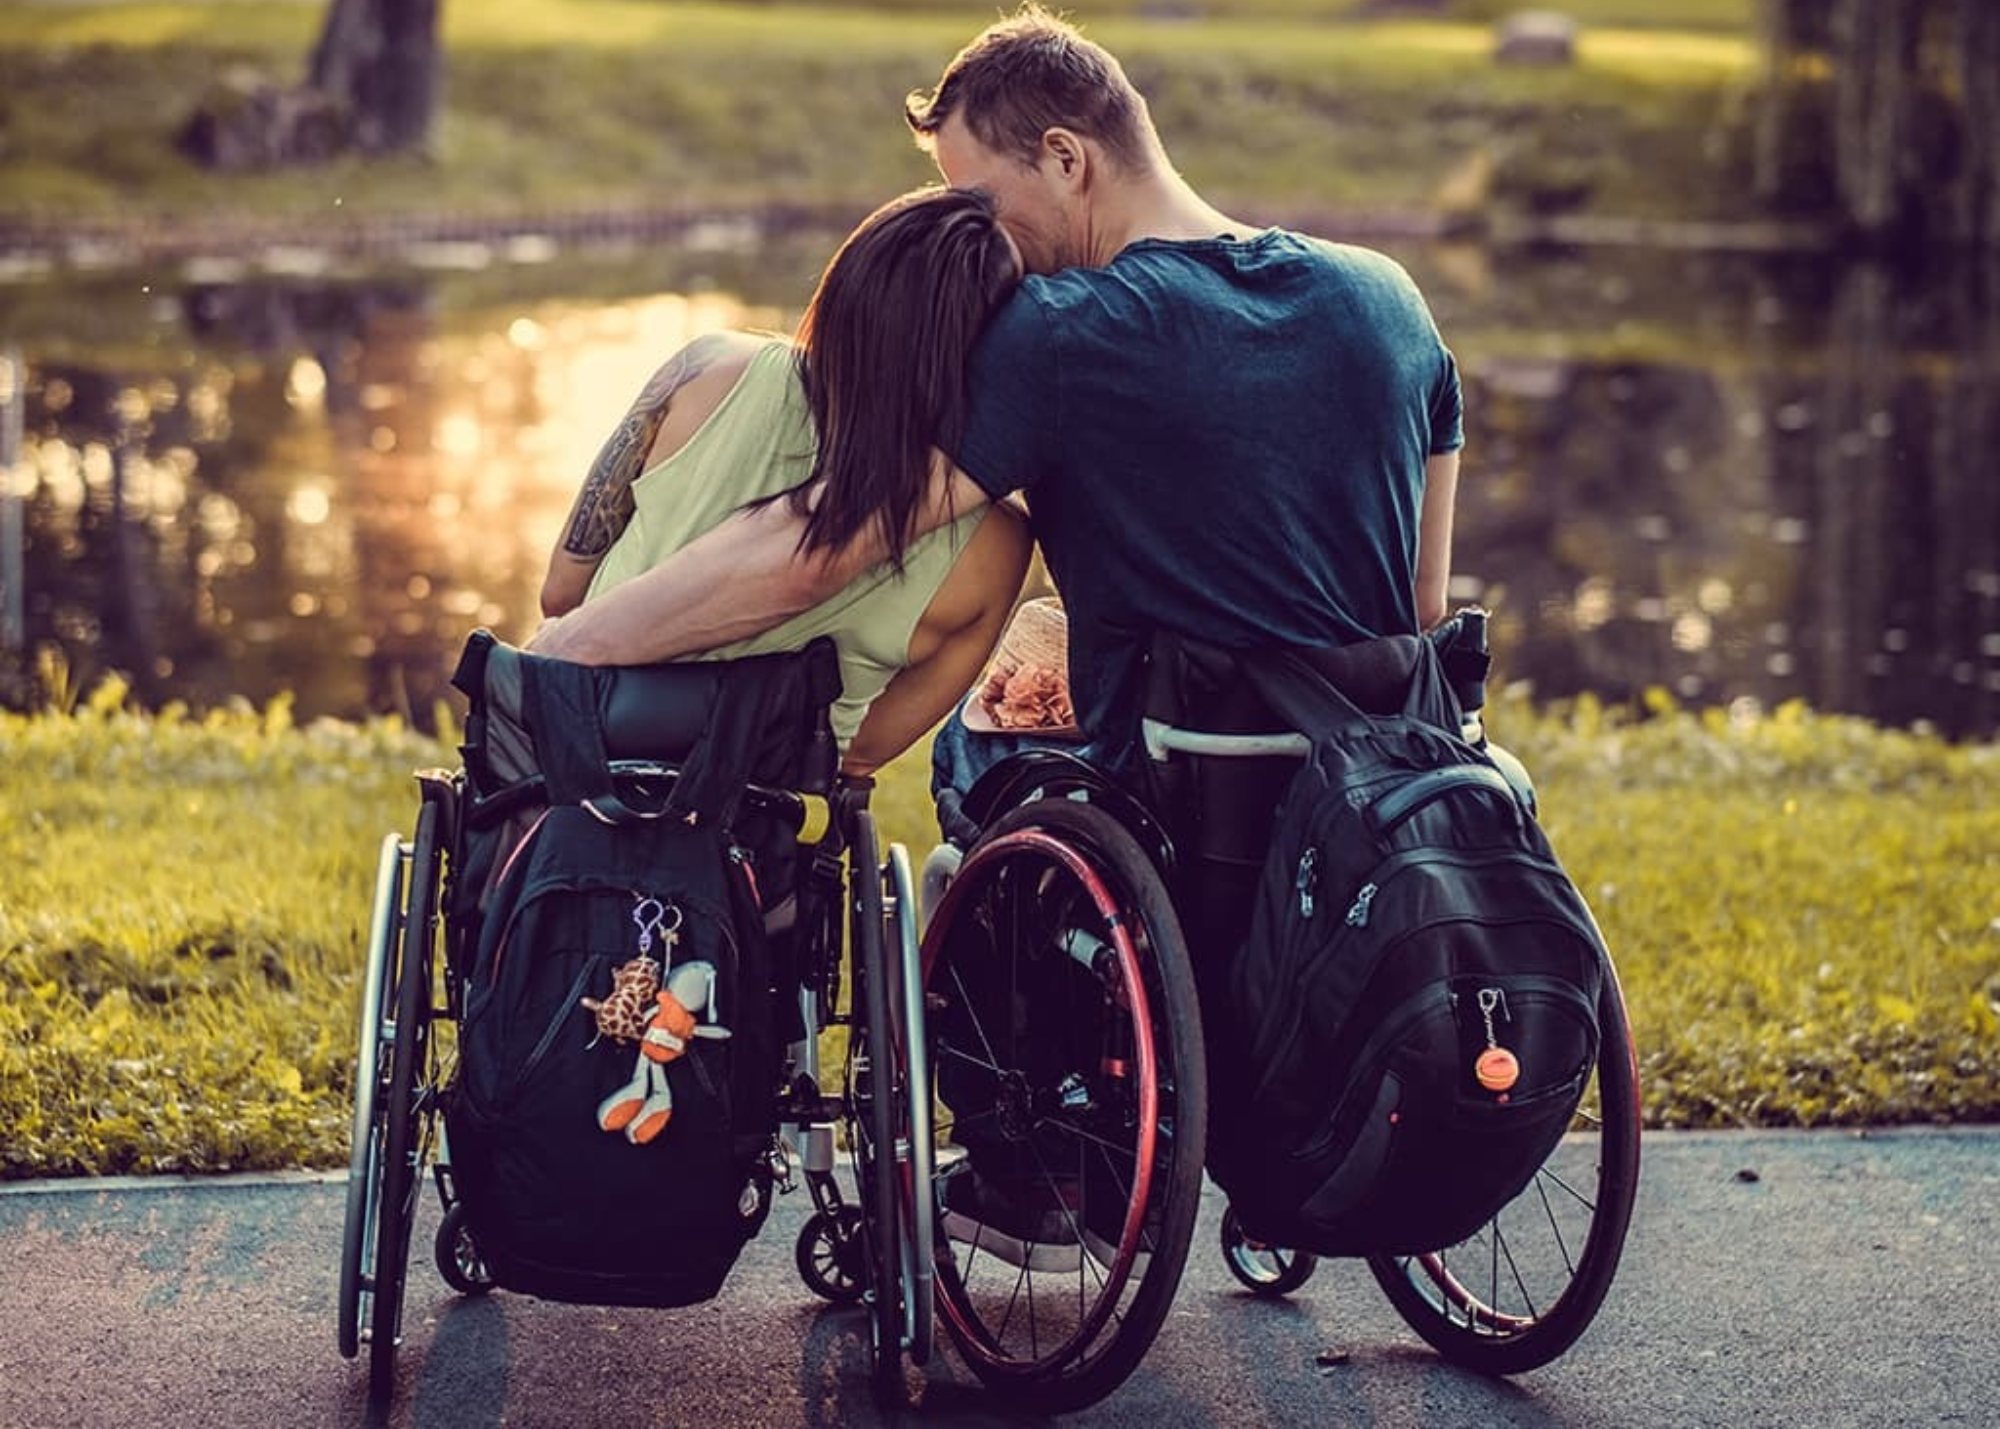 Can A Man With Spinal Cord Injury Impregnate A Woman?